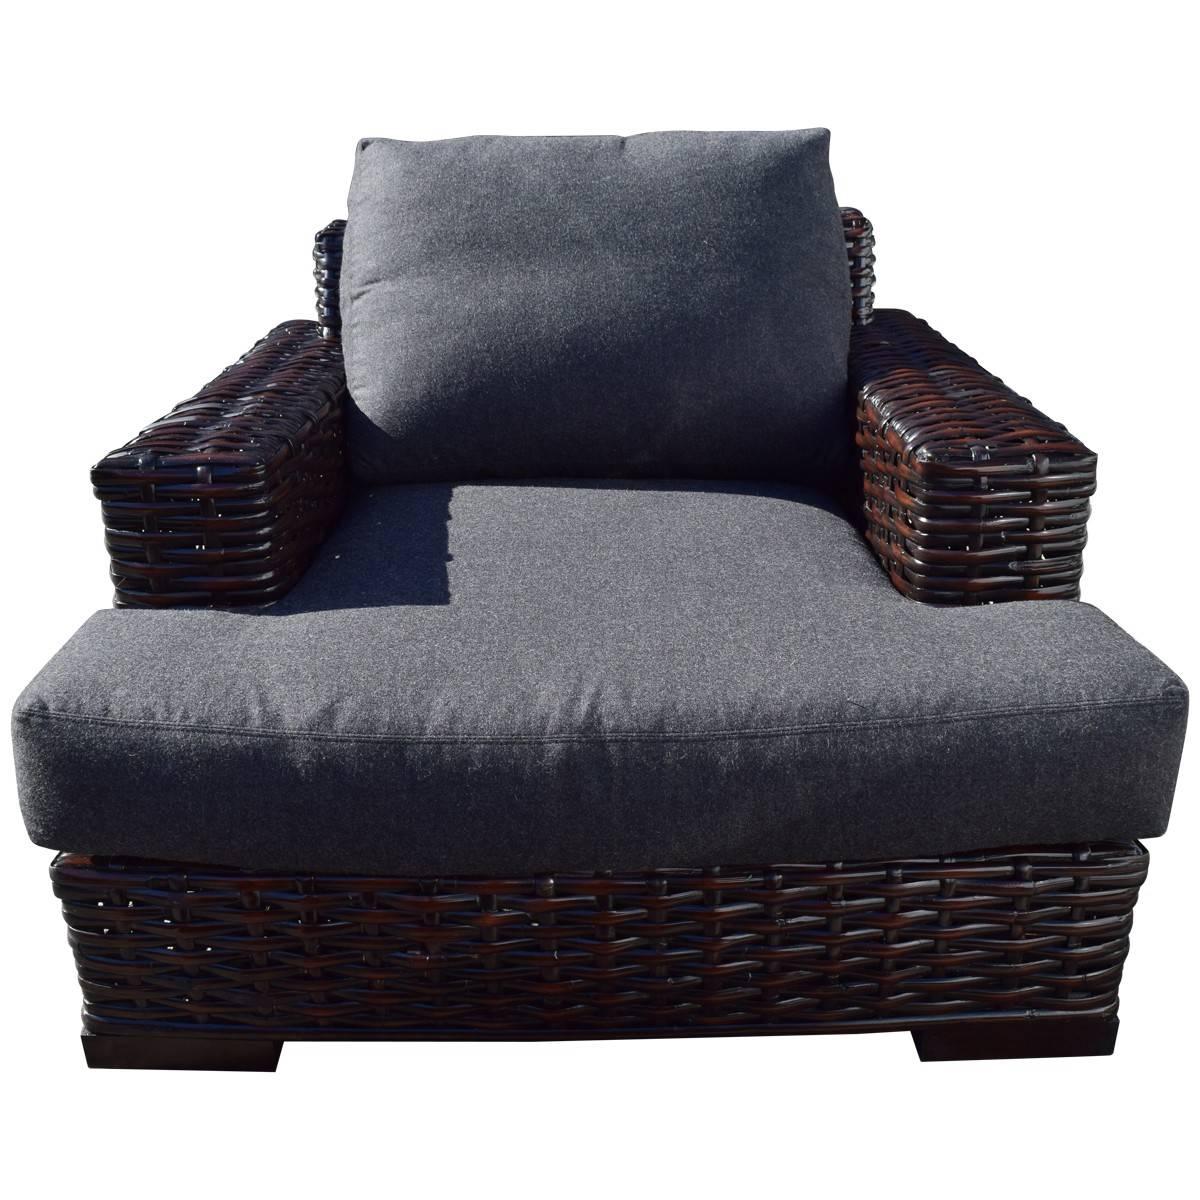 Ralph Lauren’s home furnishings and accessories reflect an enduring style and the same remarkable craftsmanship synonymous with his clothing. This armchair and coordinating ottoman have dark rattan frames and loose, down-filled cushions upholstered